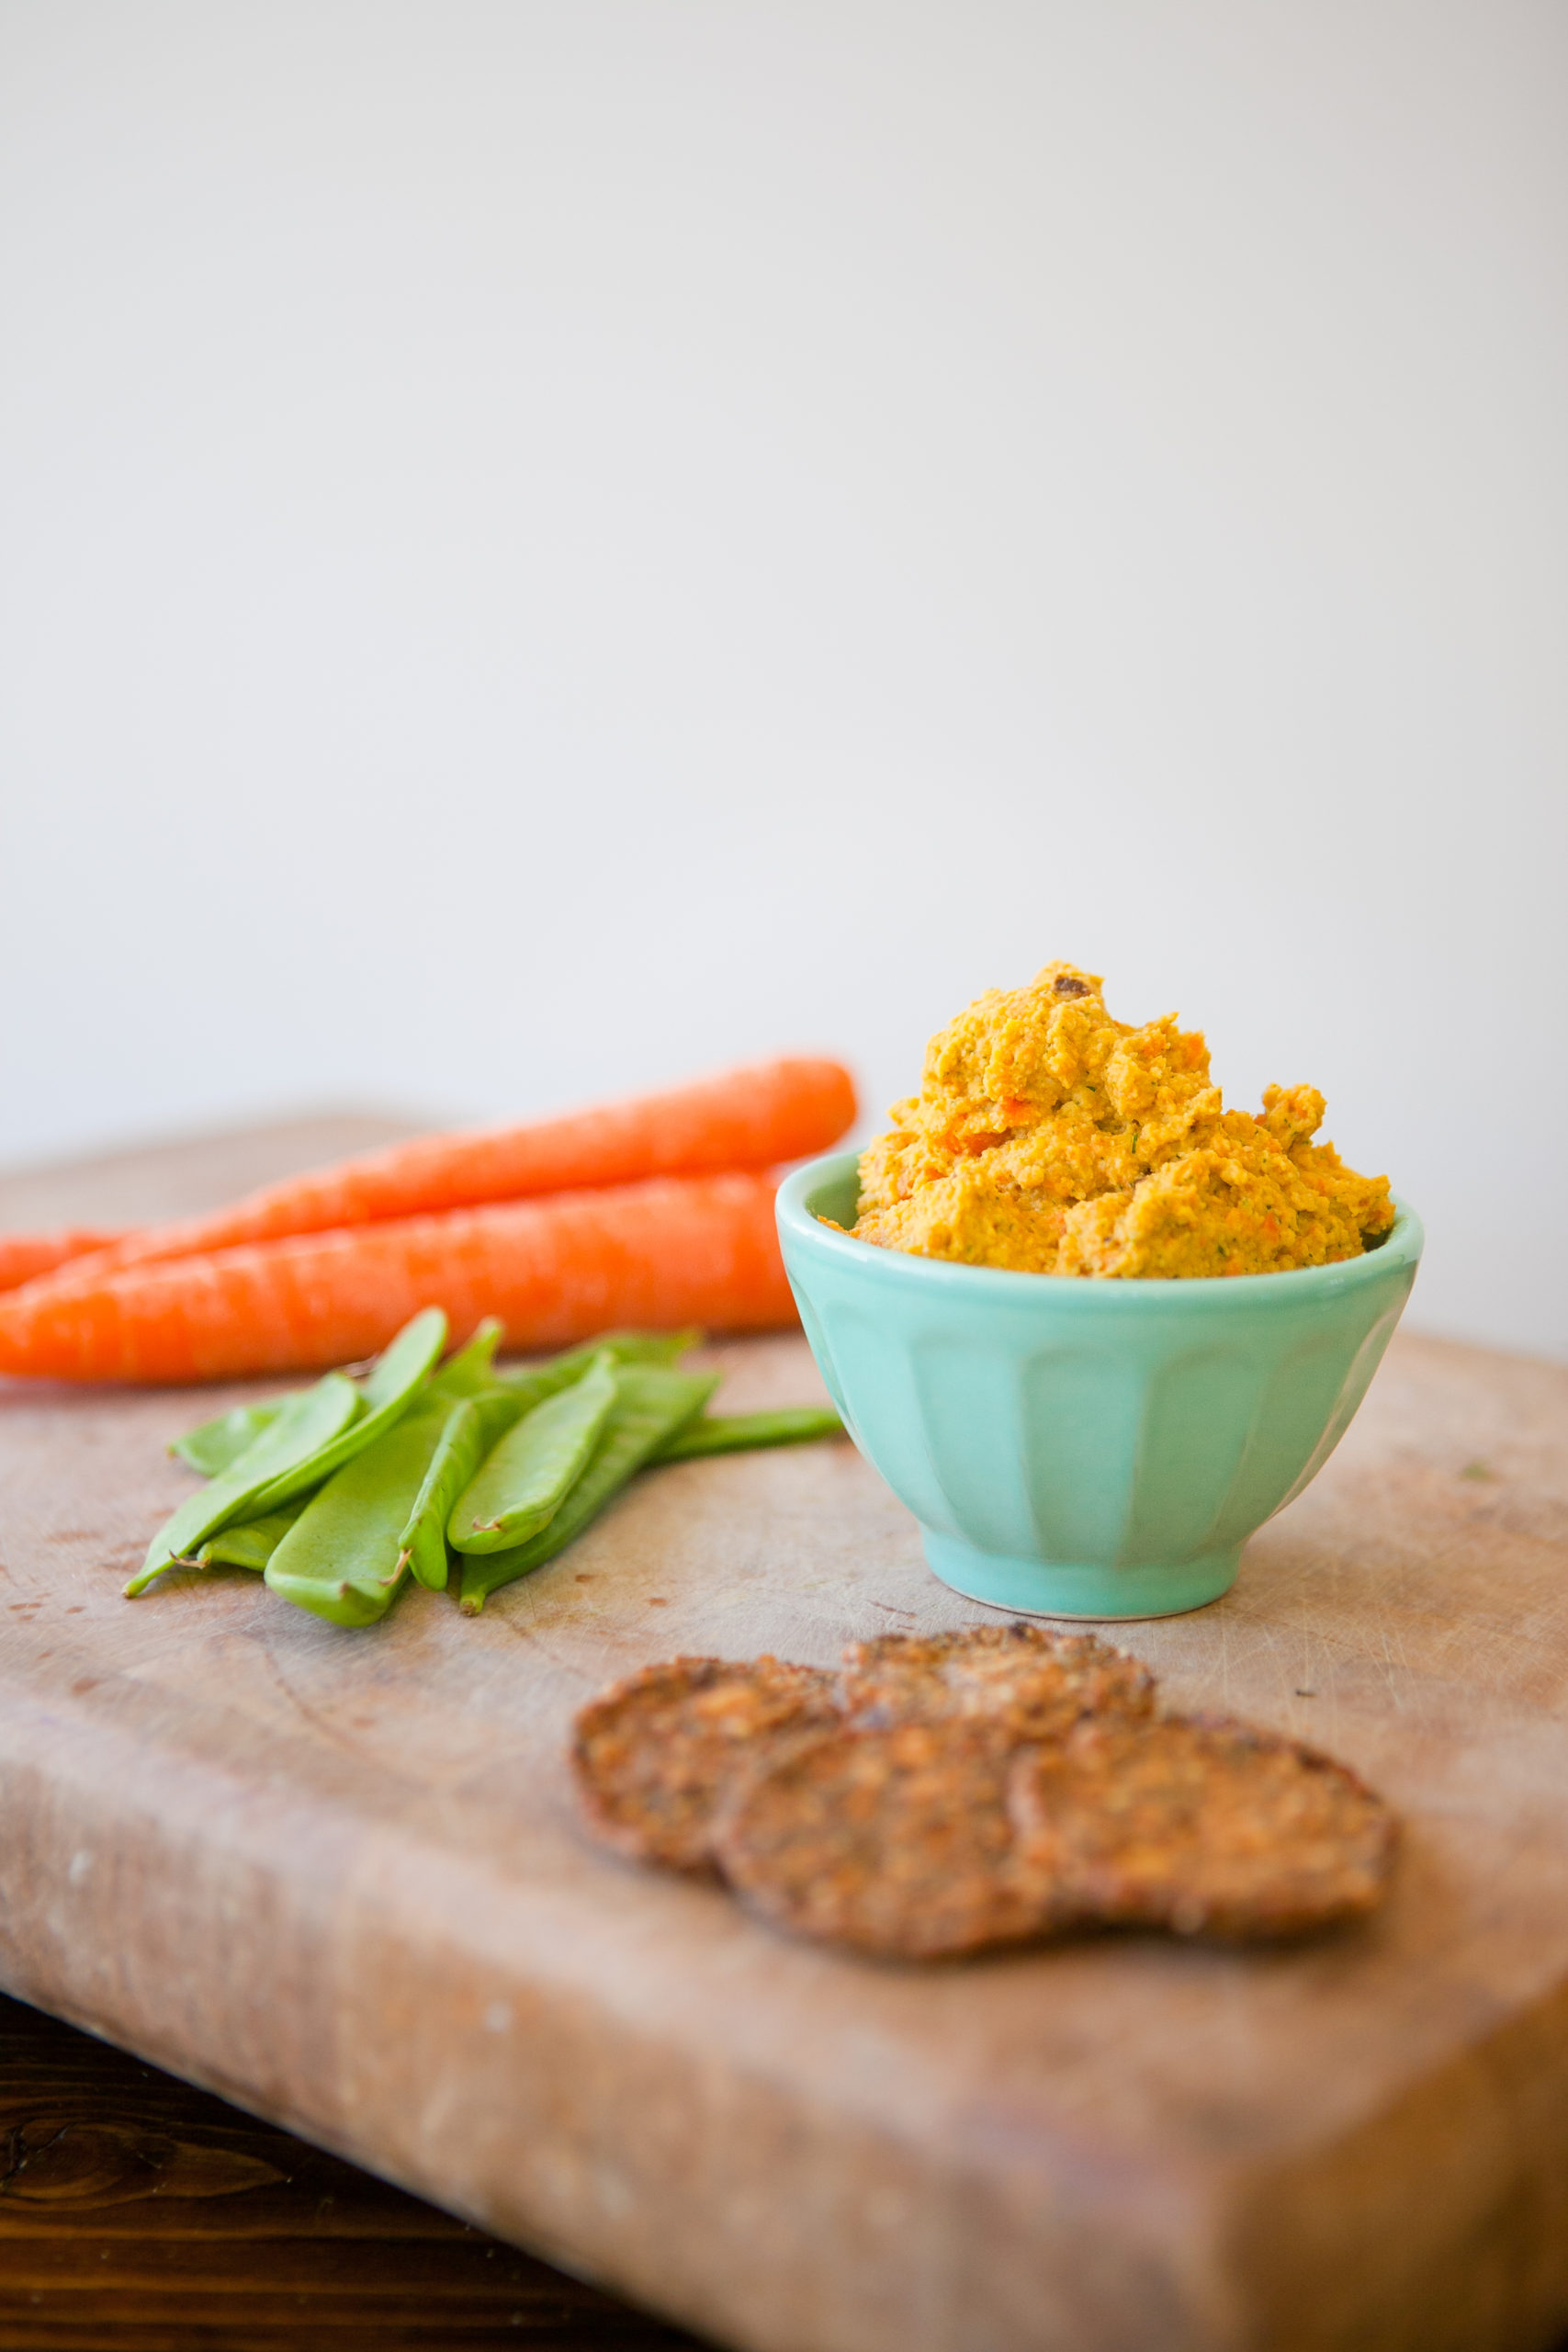 Featured image for “Spring Carrot and Dill Hummus”